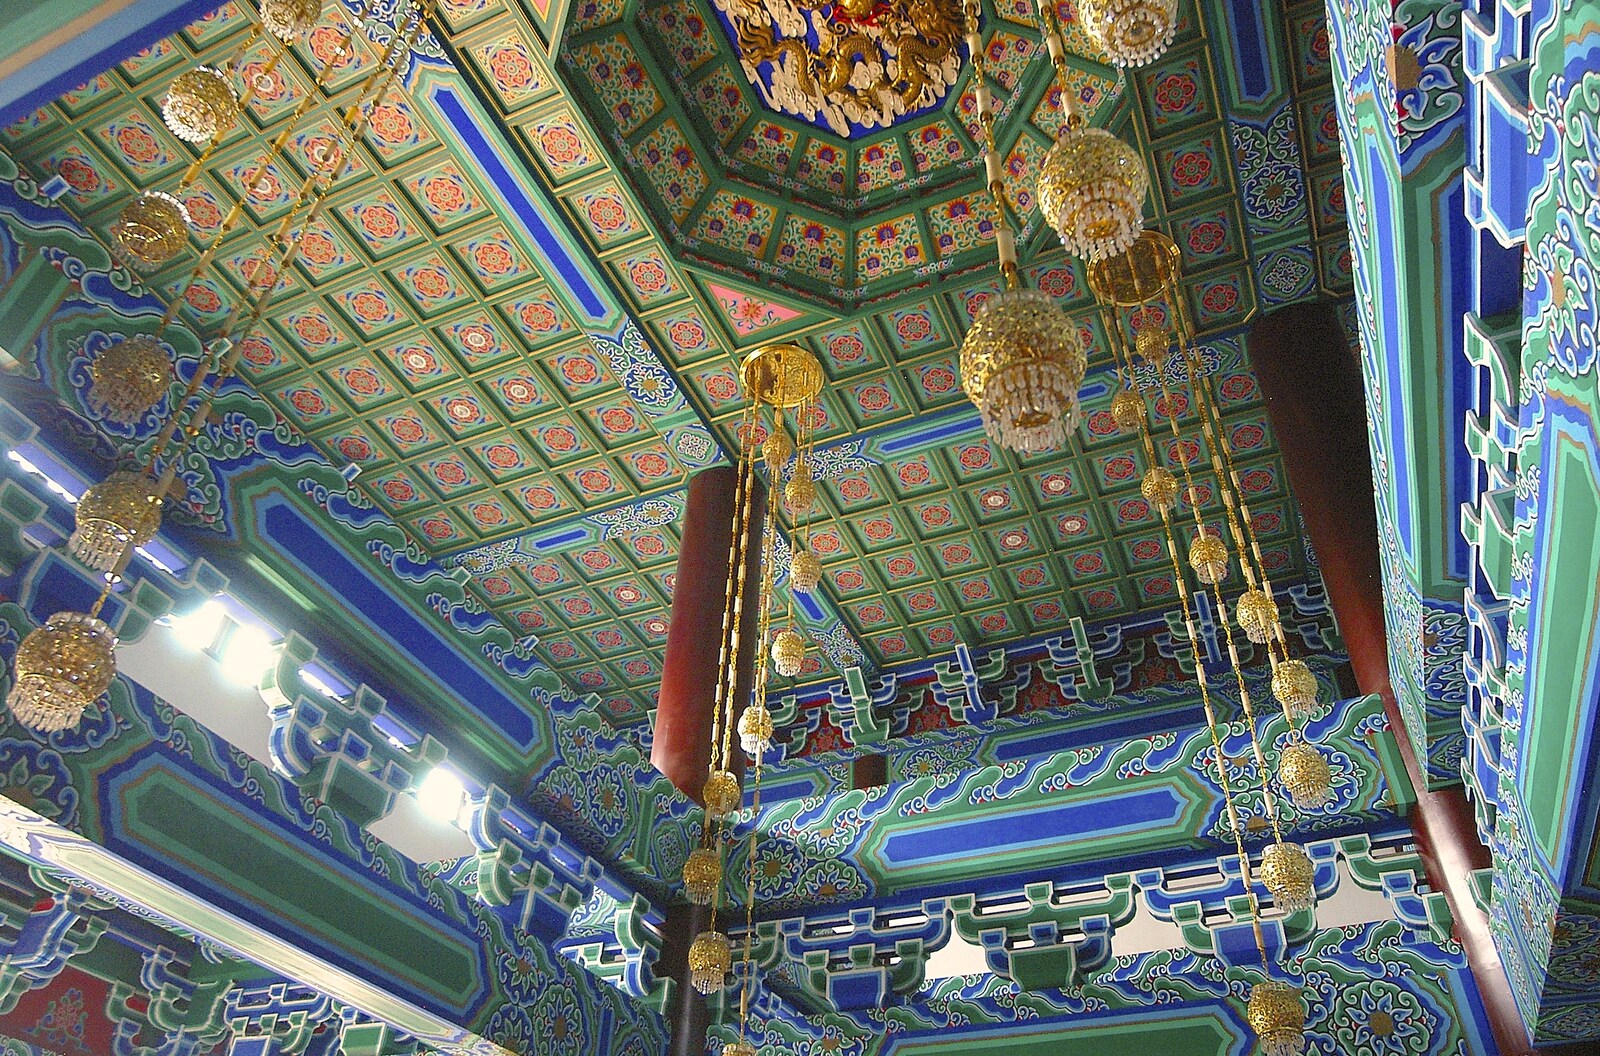 An impressive decorated ceiling from A Few Days in Nanjing, Jiangsu Province, China - 7th October 2006